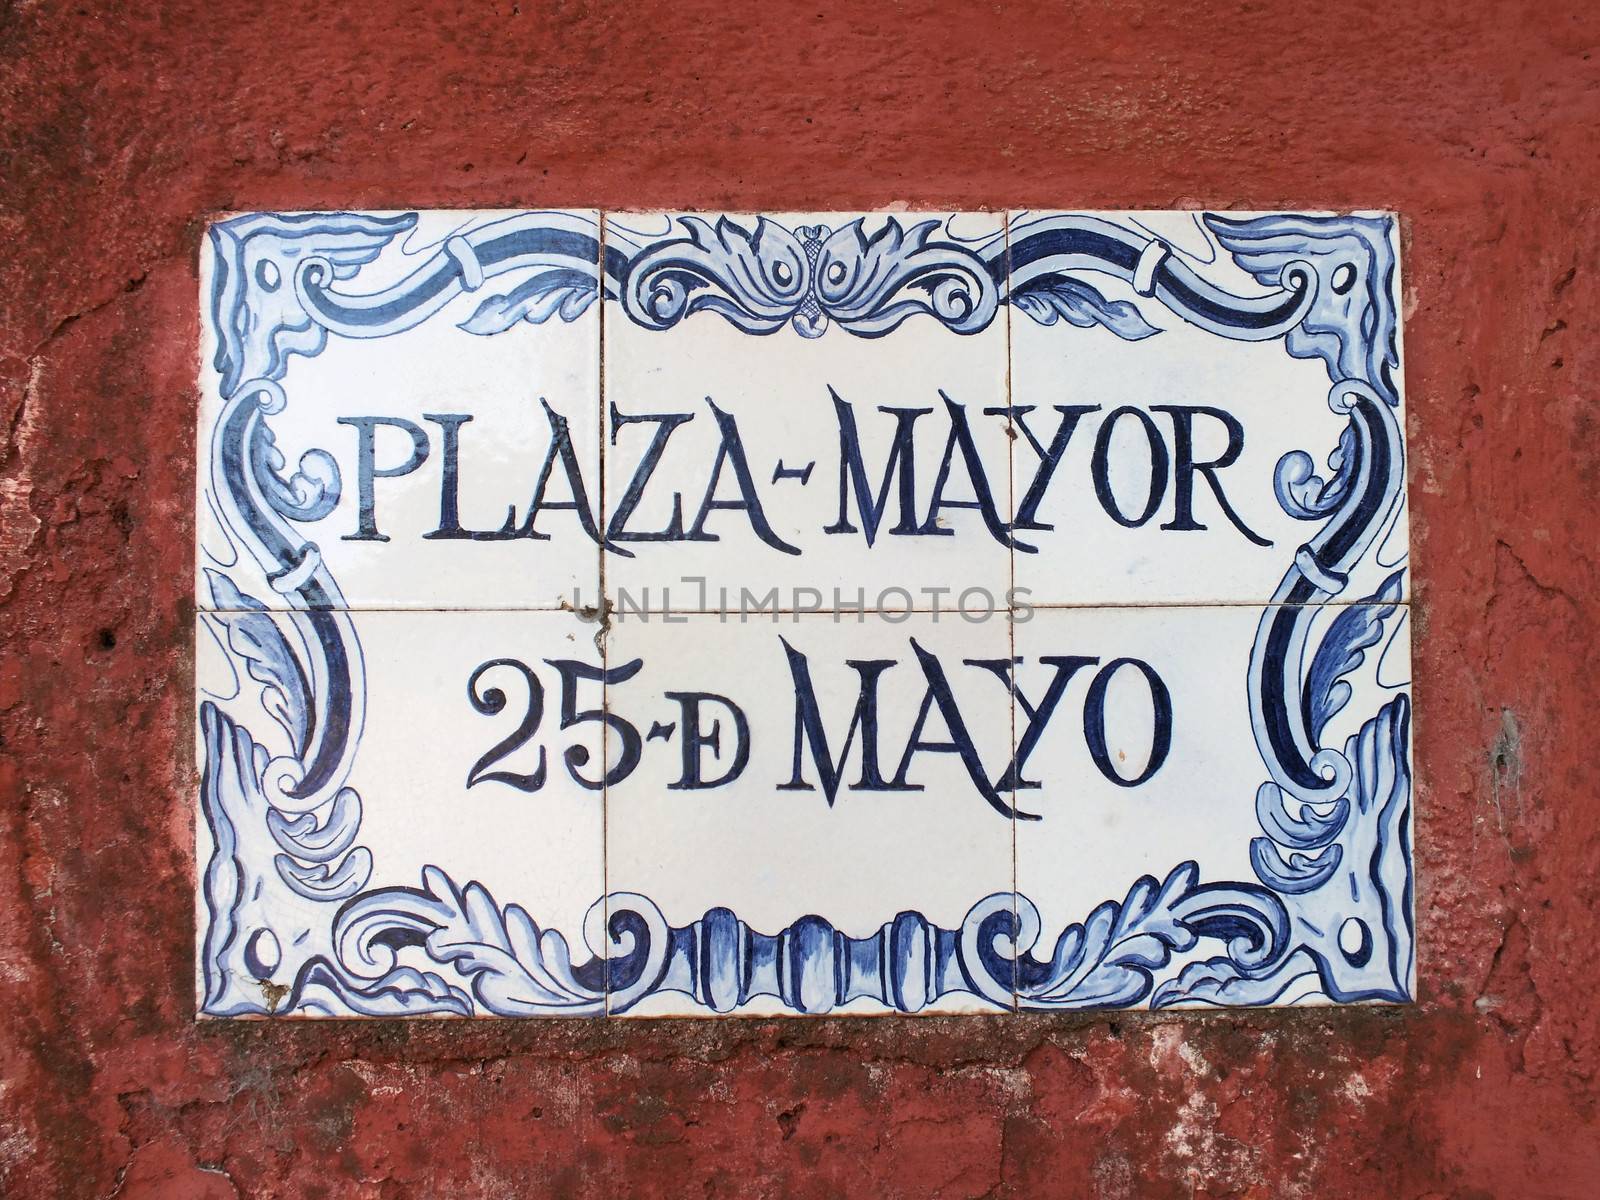 The town on Colonia del Sacramento was founded in 1680 by Portugese and retains many of its old Portuguese history such as this tiled street sign.